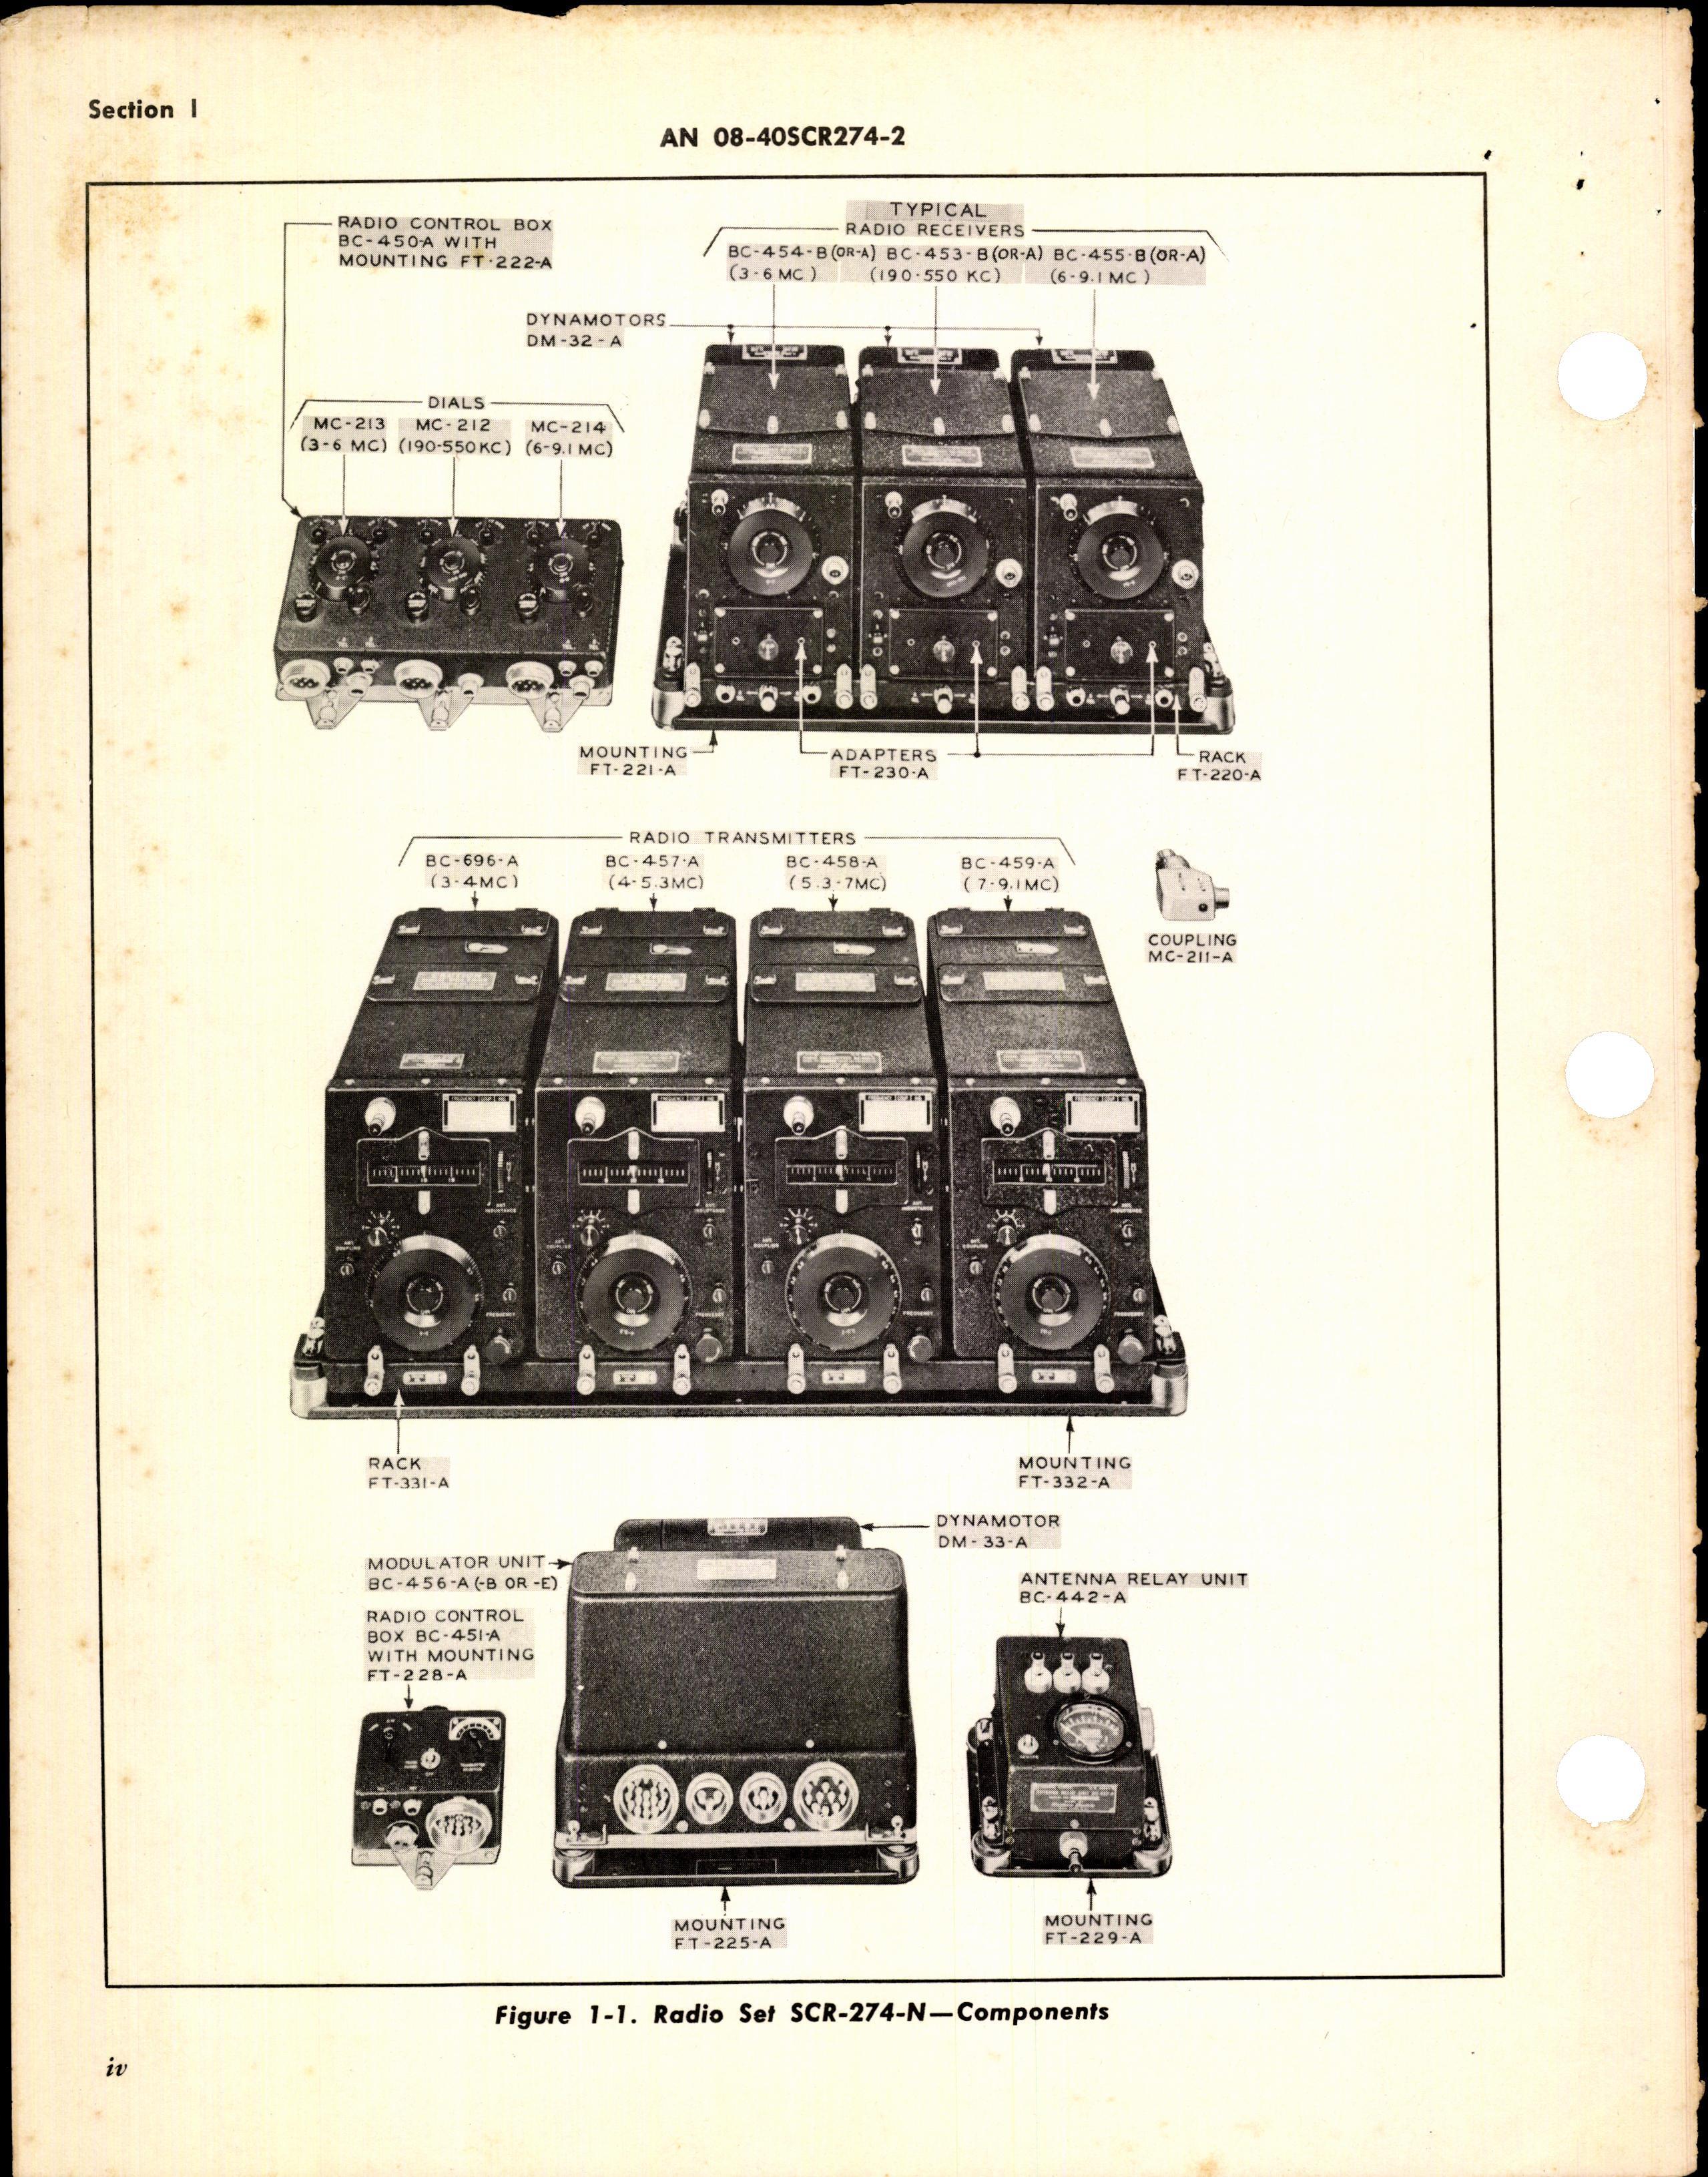 Sample page 6 from AirCorps Library document: Operating Instructions for Radio Set SCR-274-N